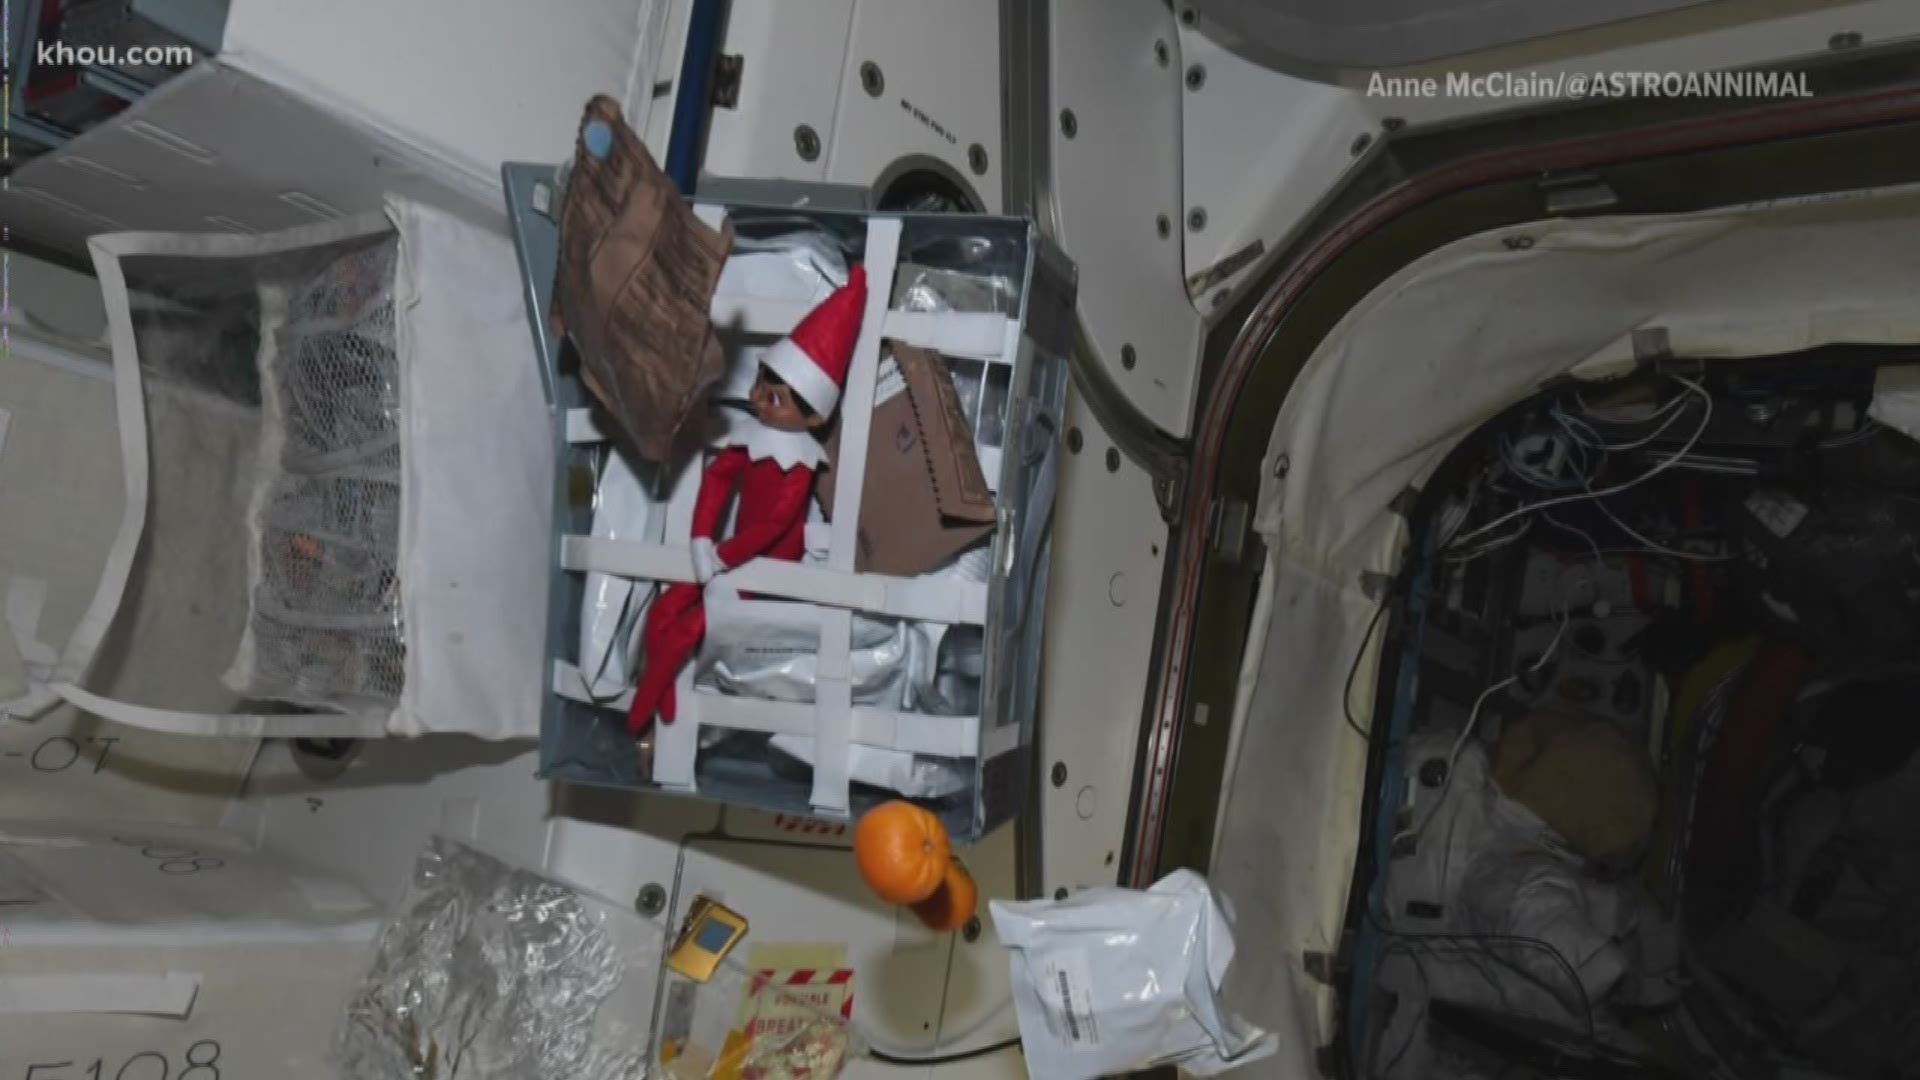 Astronaut Anne McClain found an Elf on the Shelf hiding on the International Space Station. She tweeted the photo saying she hopes he doesn't get into anything too important.